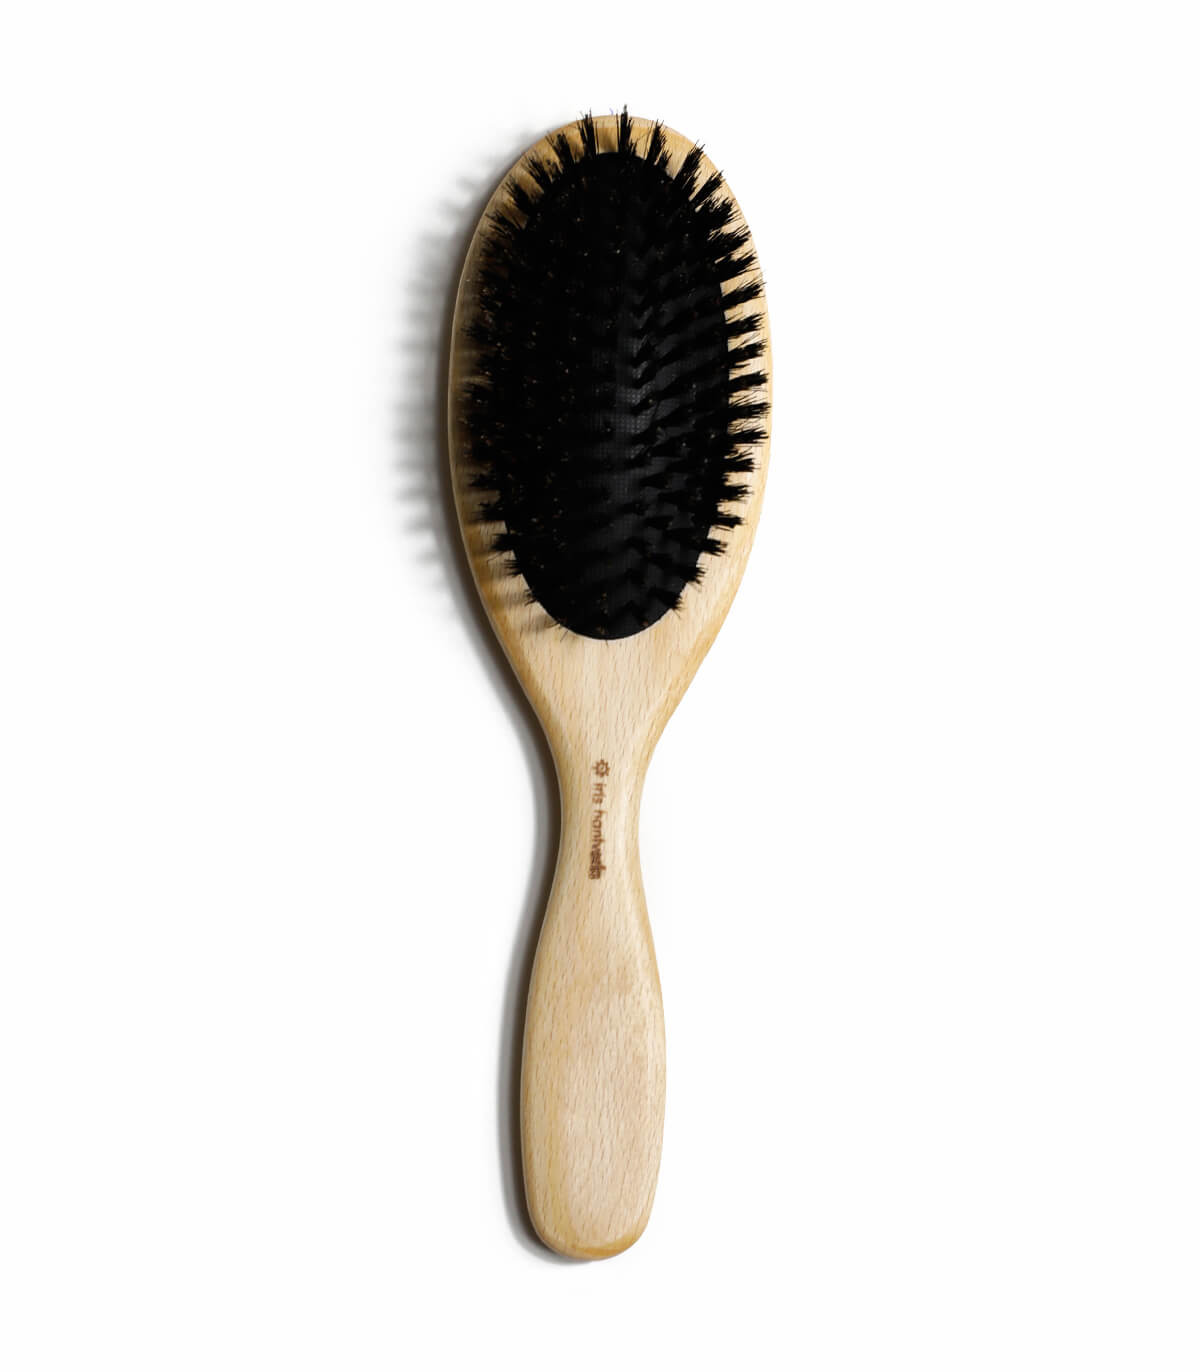 5 Row Olivewood Hairbrush with Boar Bristles  Made in Germany  Fendrihan  Canada